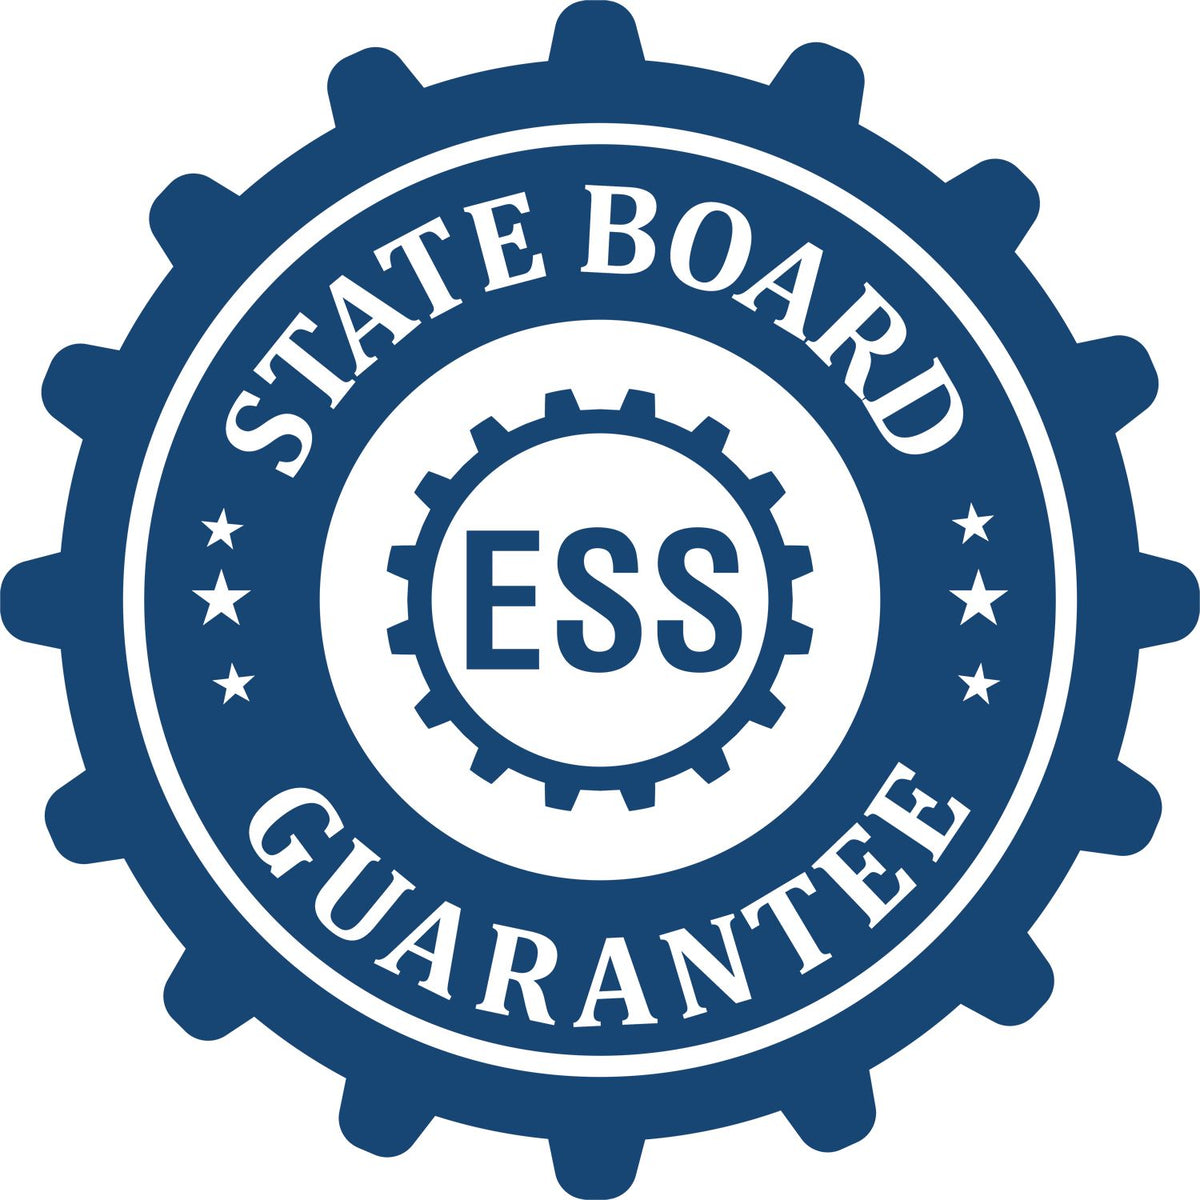 An emblem in a gear shape illustrating a state board guarantee for the Handheld Iowa Professional Geologist Embosser